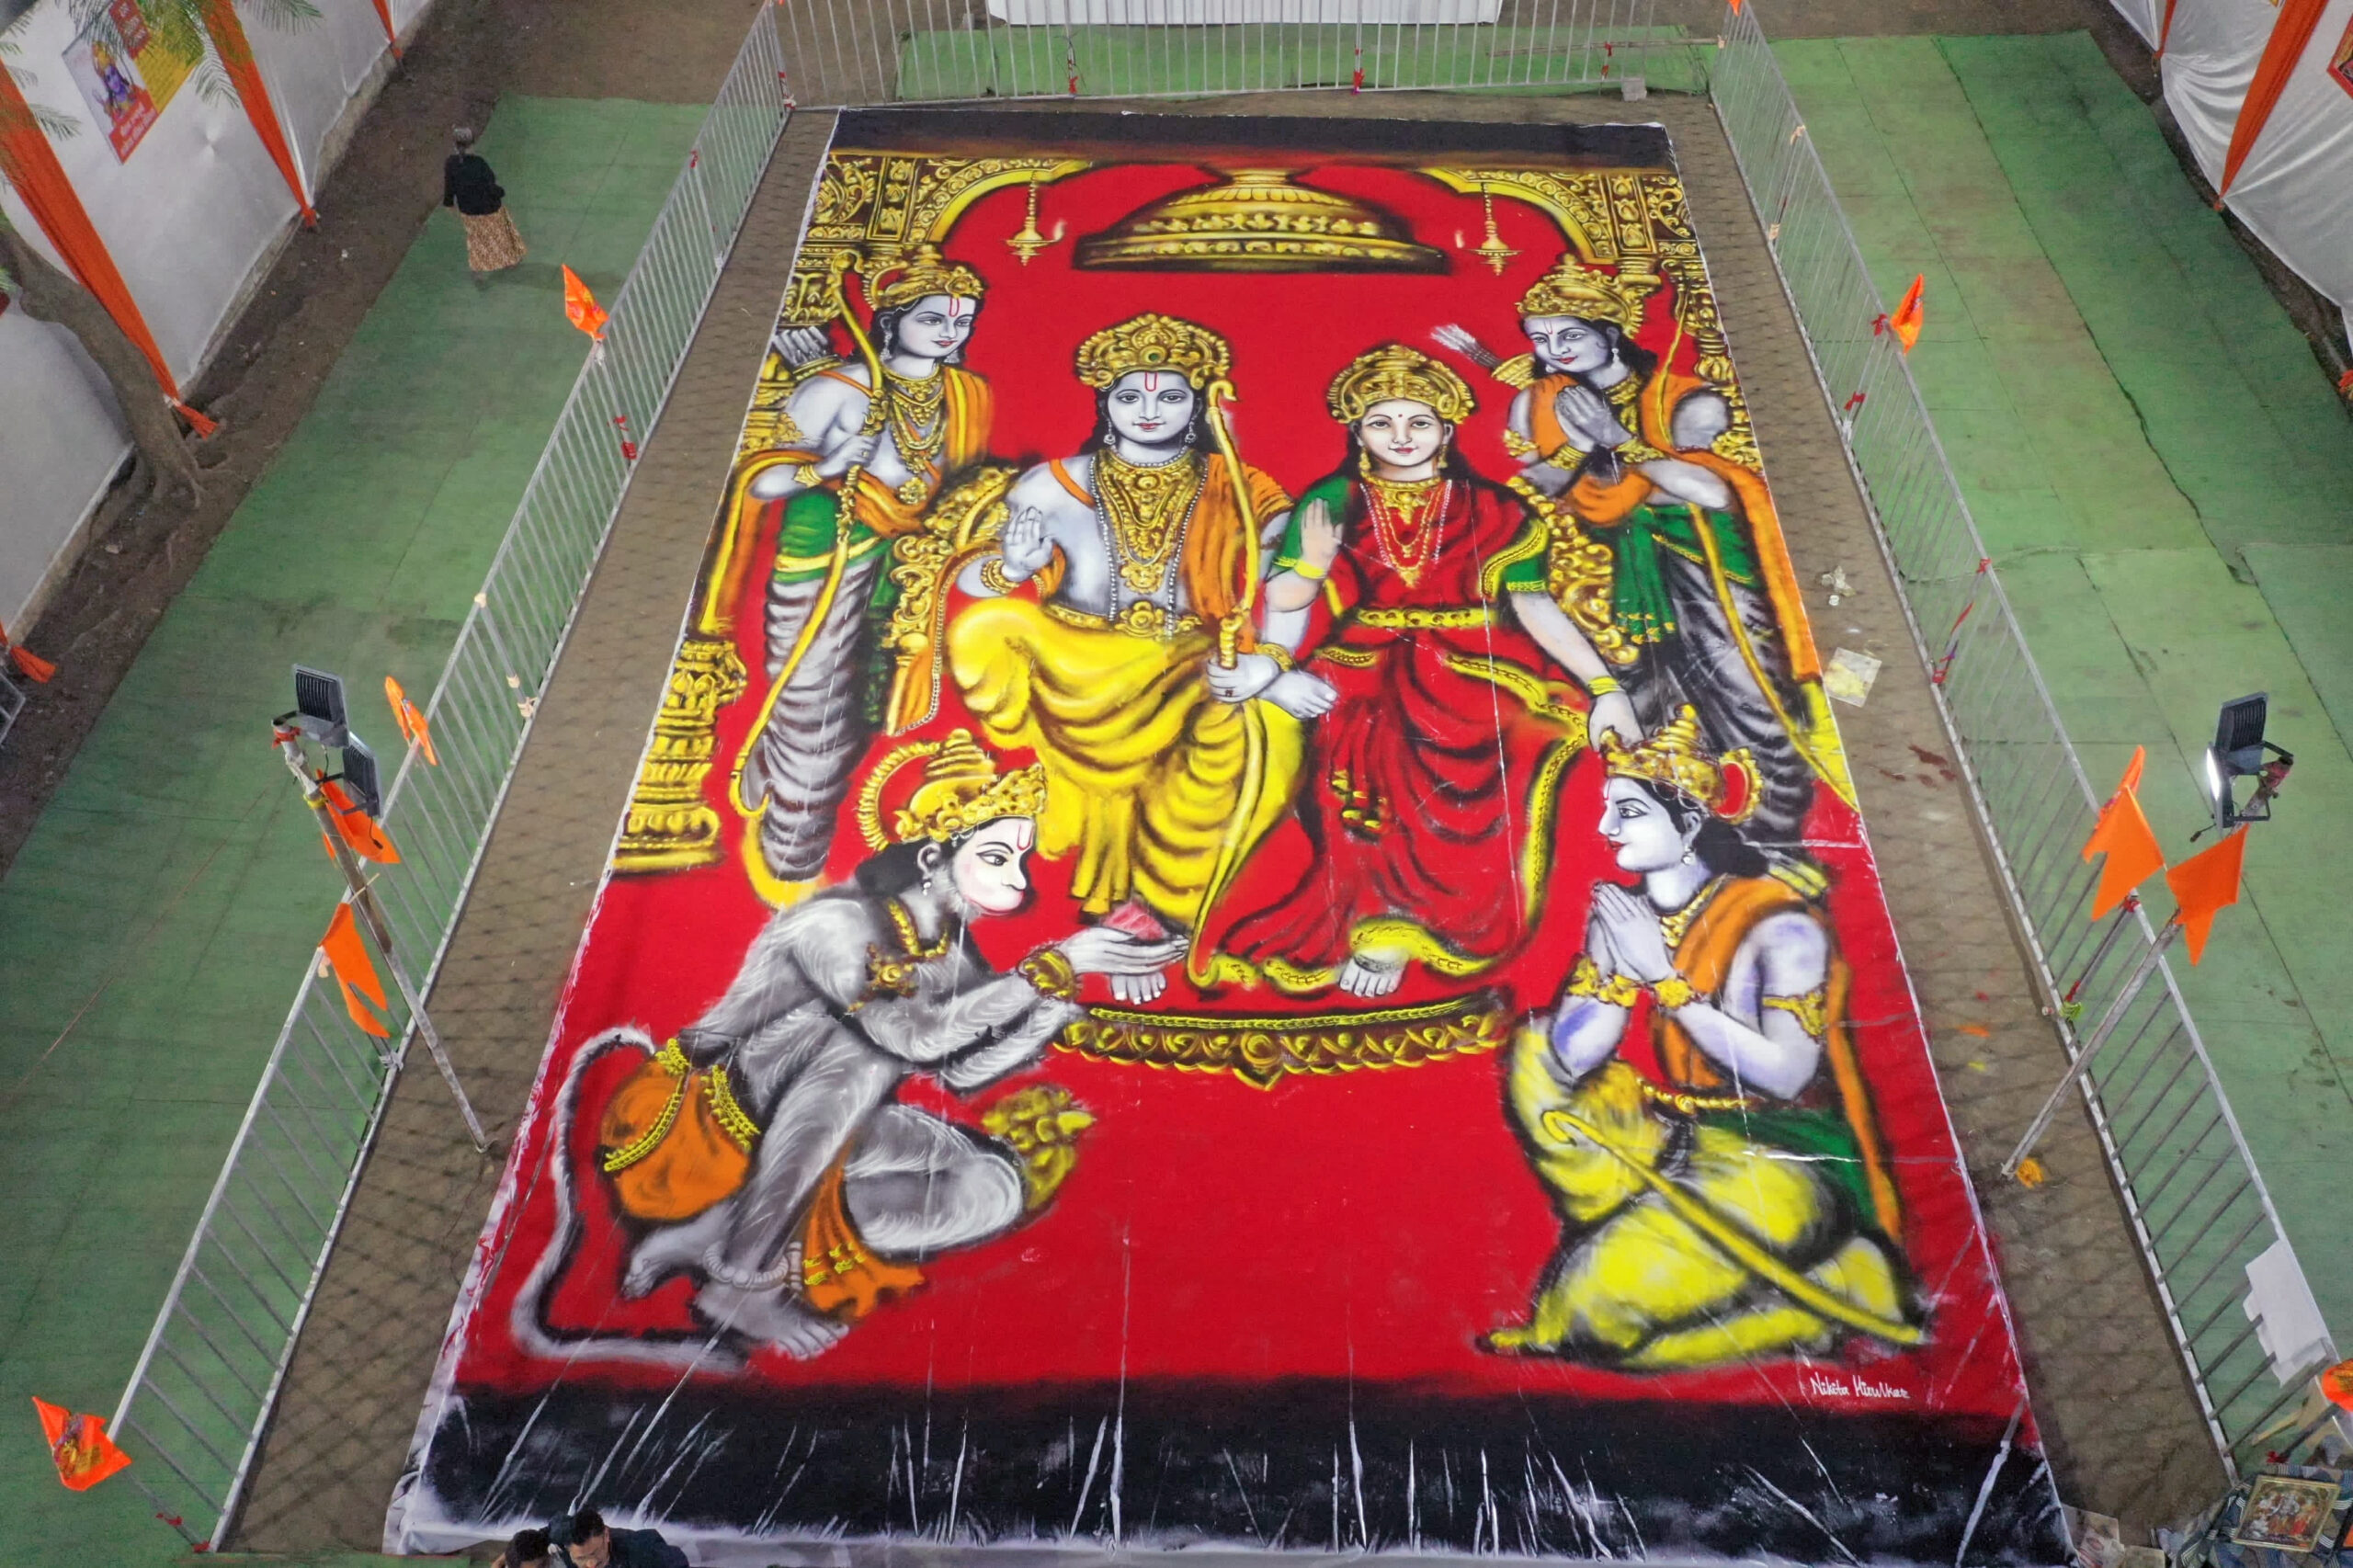 A huge rangoli of Lord Ram, Lord Laxman, Goddess Sita and Lord Hanuman was made by devotees on the eve of Pran Pratishtha ceremony of Ayodhya Ram Temple